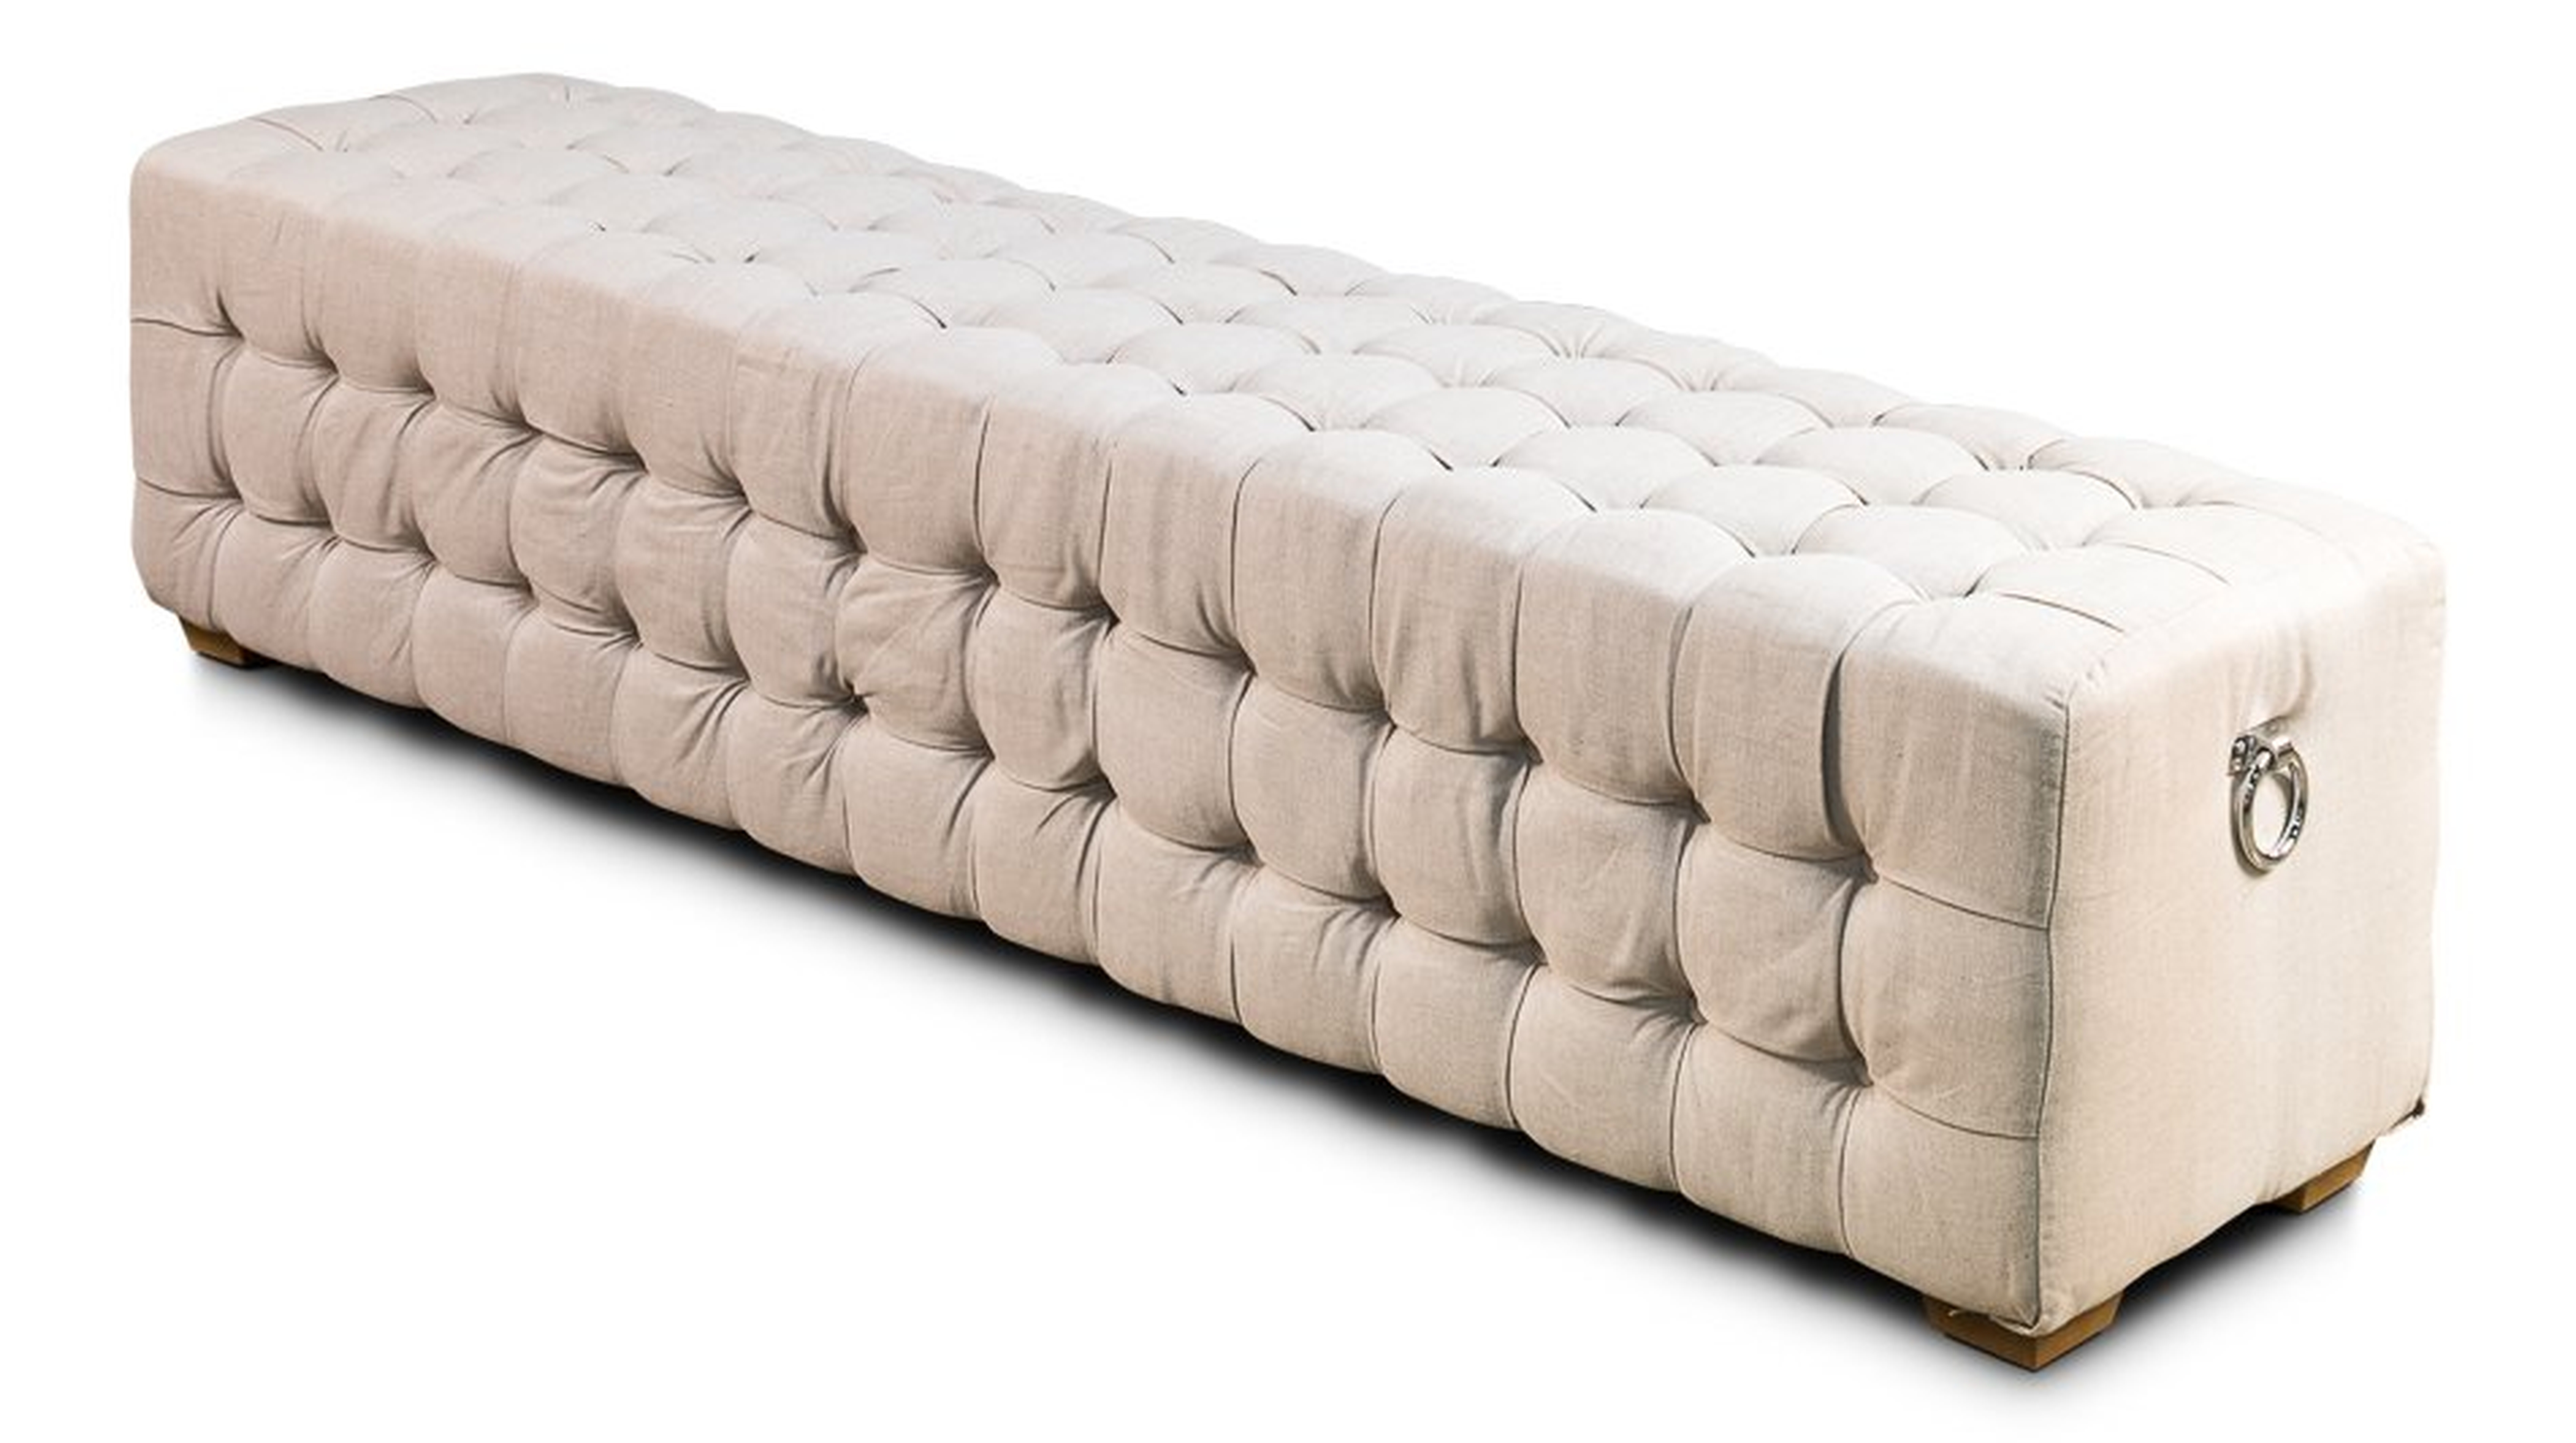 LONG TUFTED UPHOLSTERED BENCH - Perigold